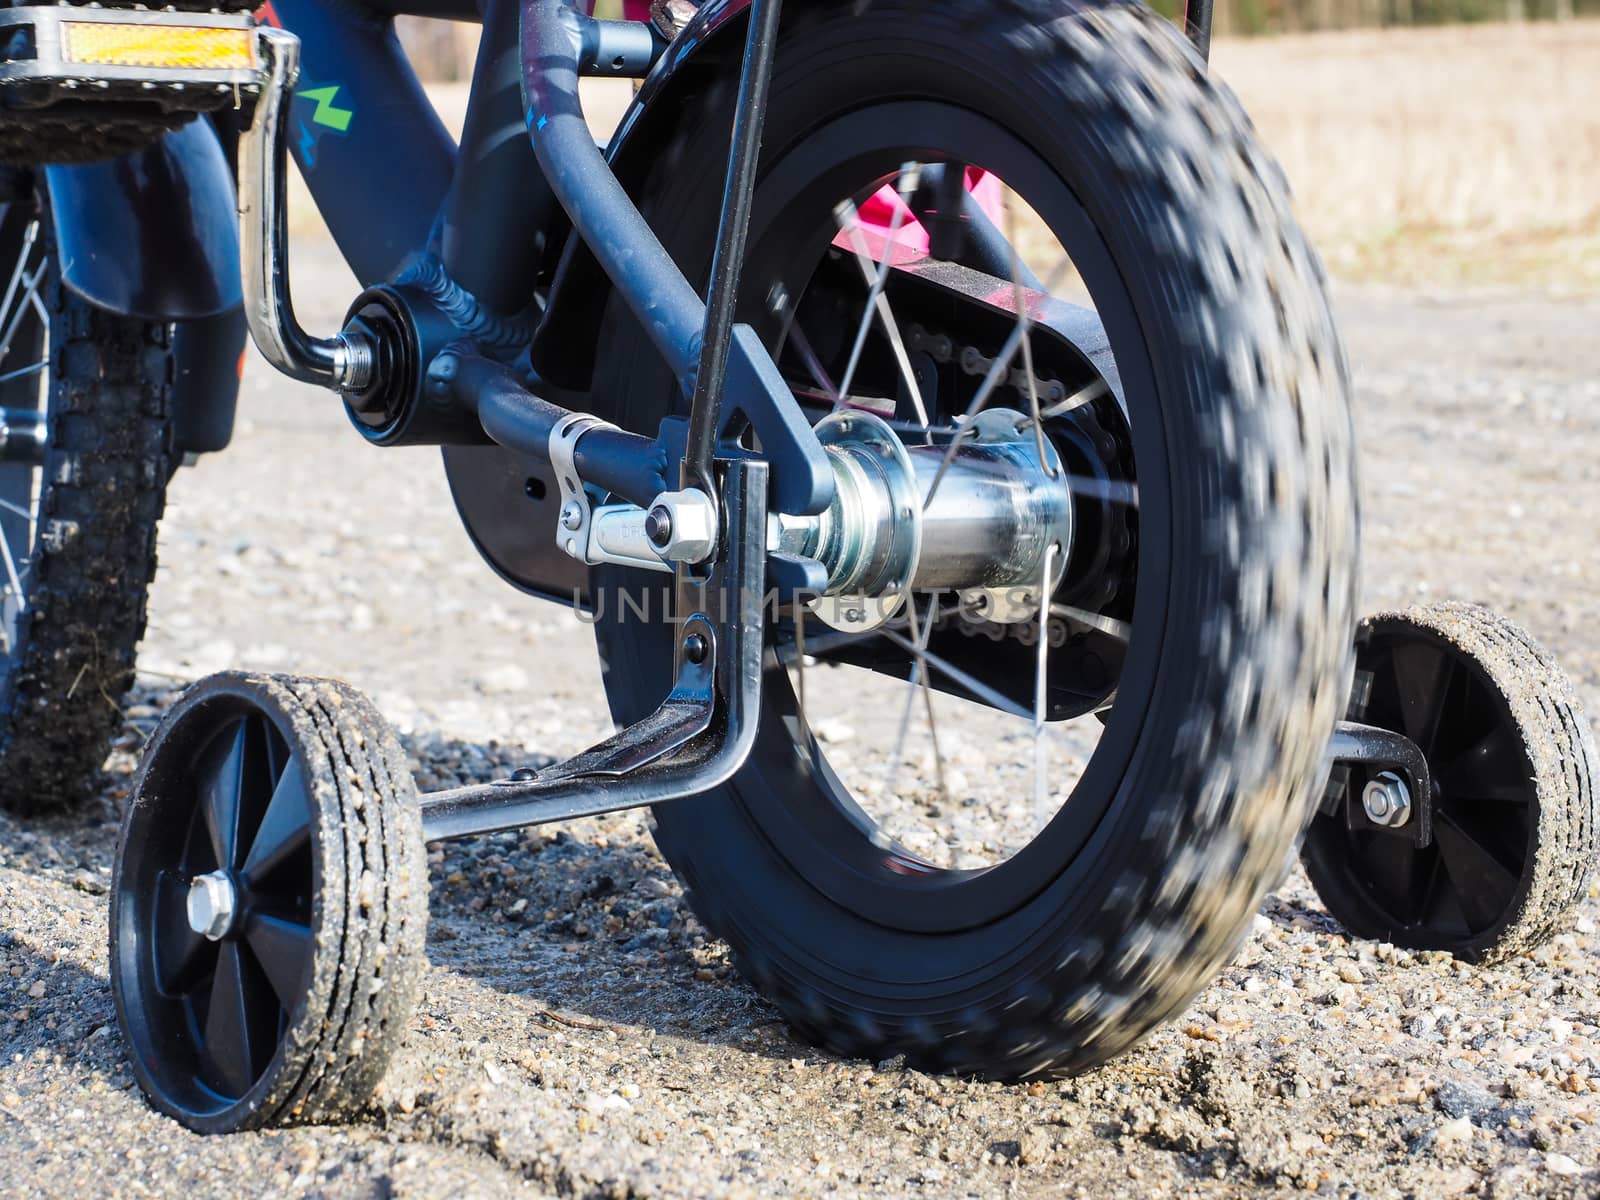 Bicycle with supporting wheels stuck in loose gravel